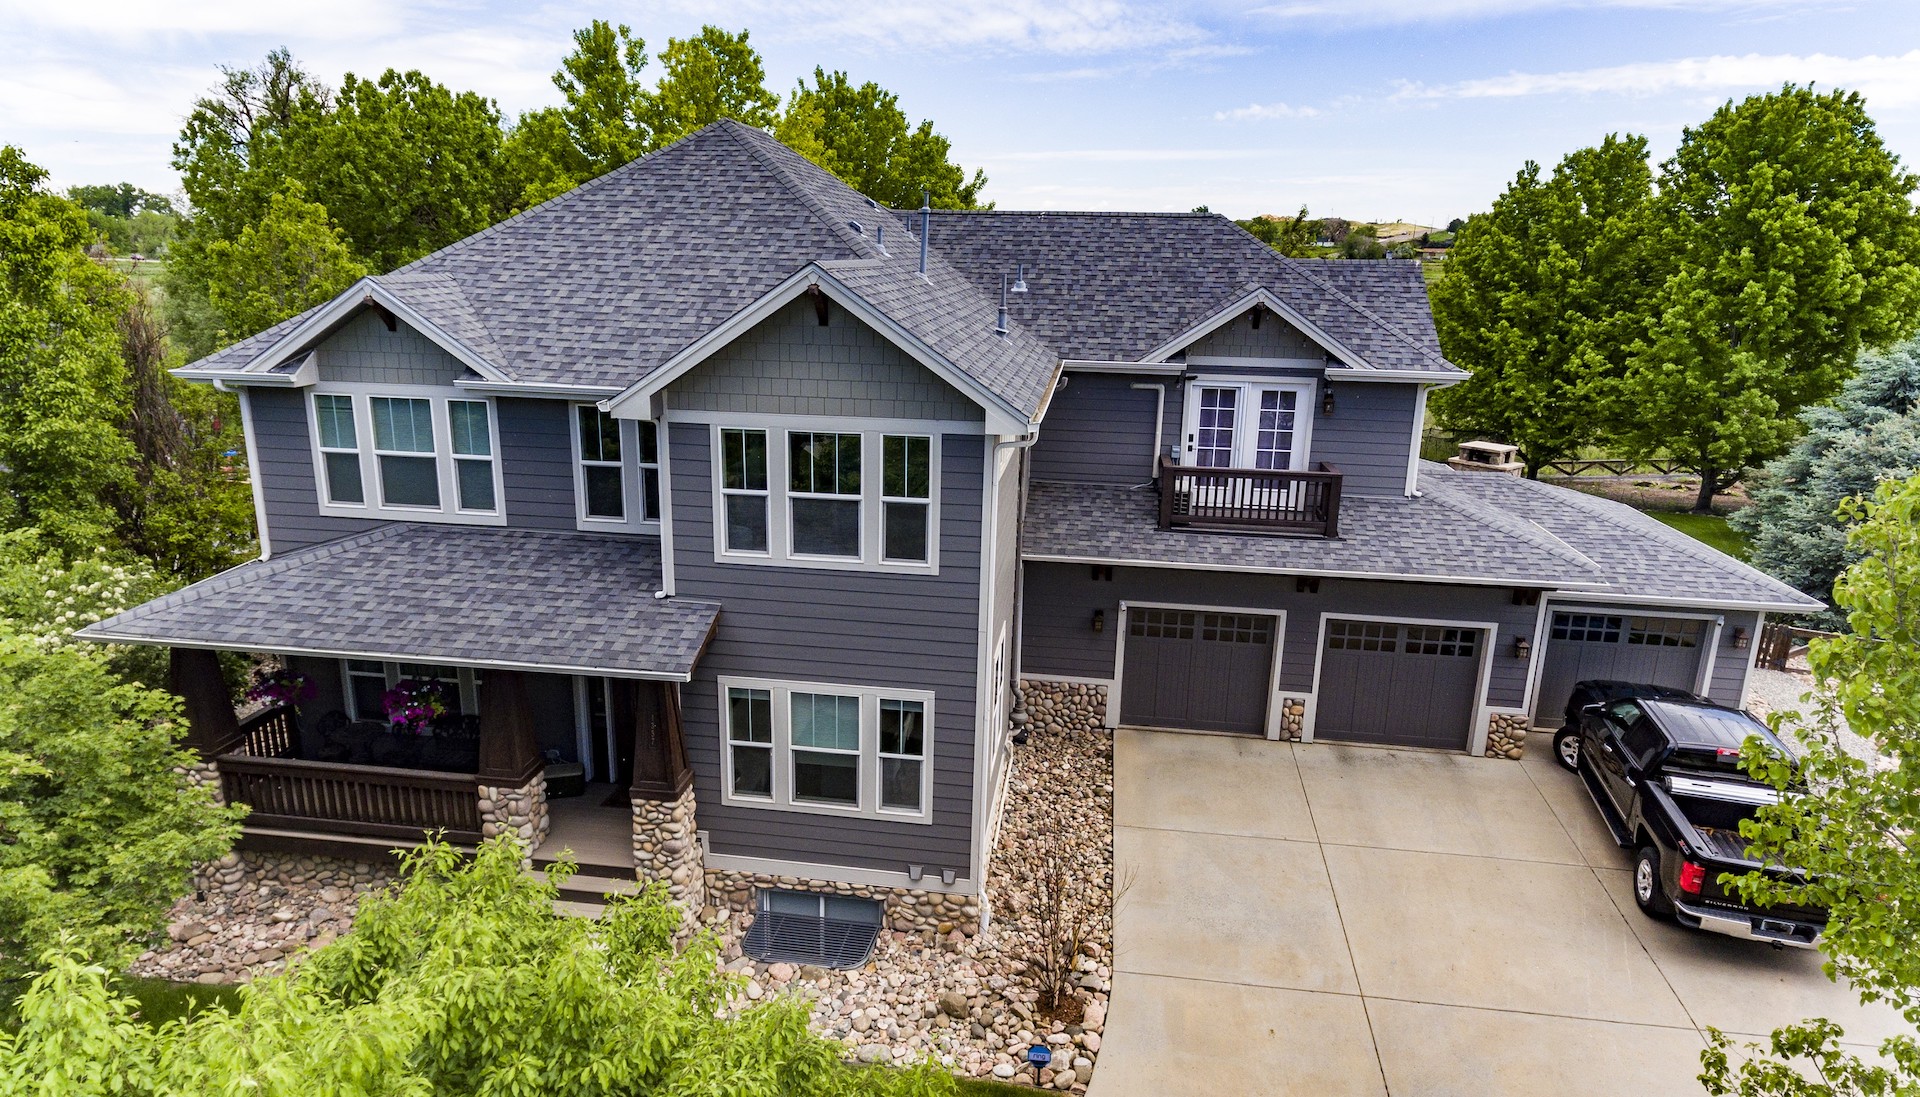 Erie, Colorado home with Aged Pewter shingles and artic white trim